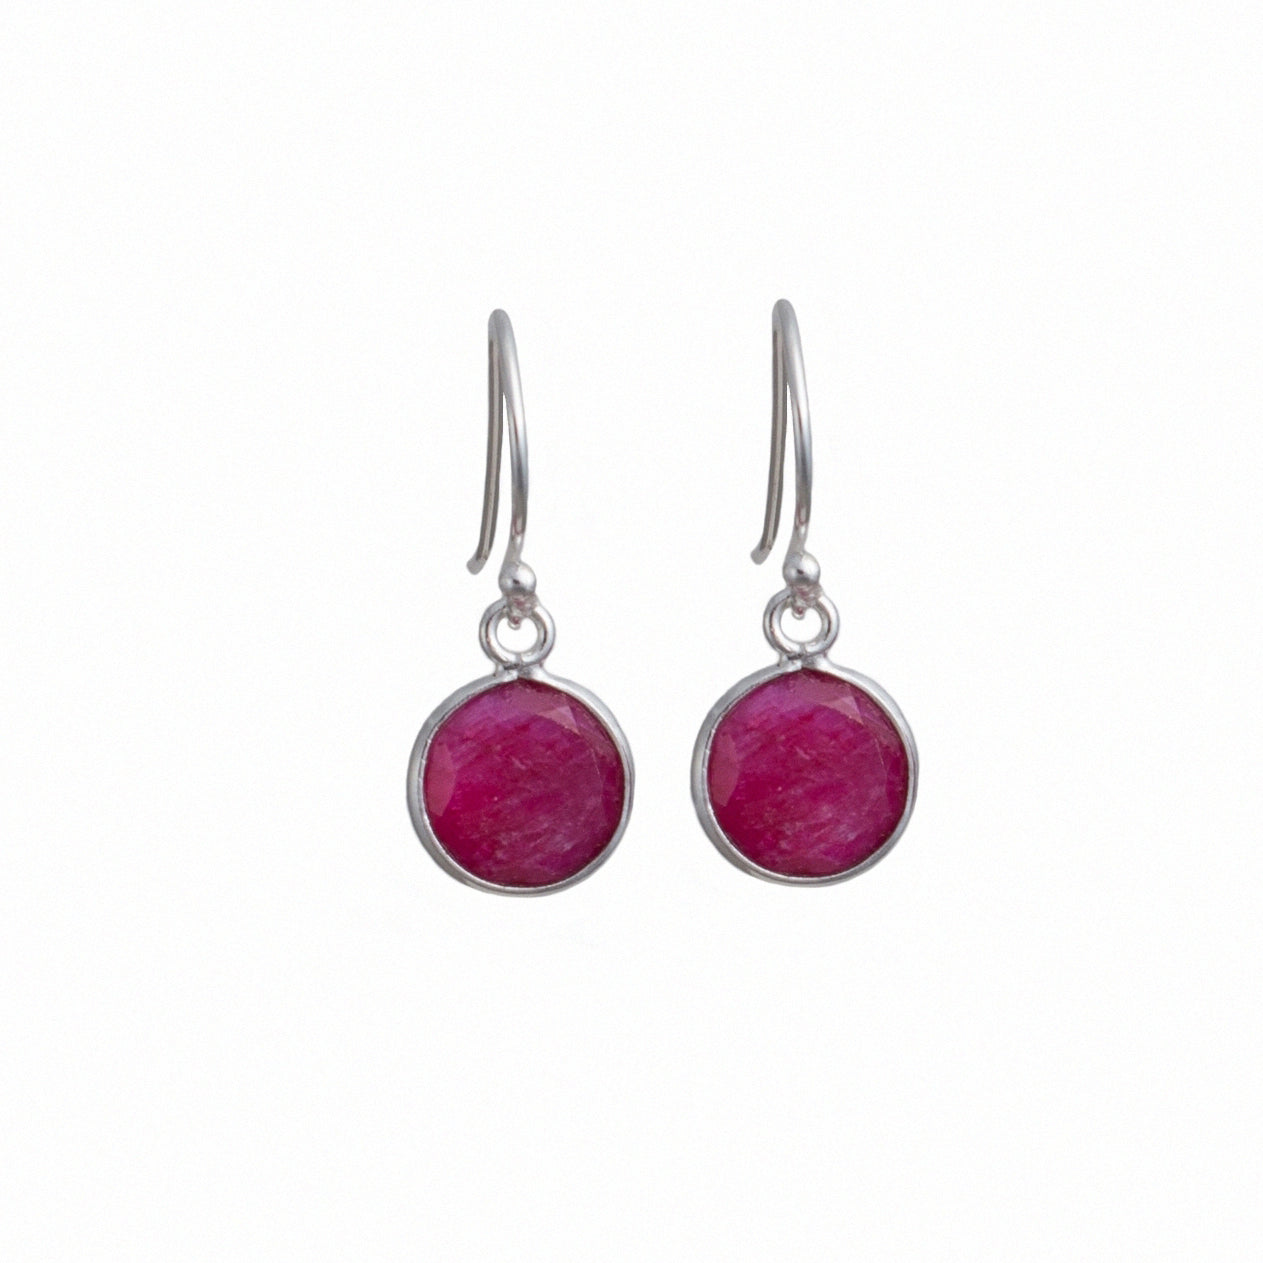 Ruby Quartz Sterling Silver Earrings with a Round Faceted Gemstone Drop